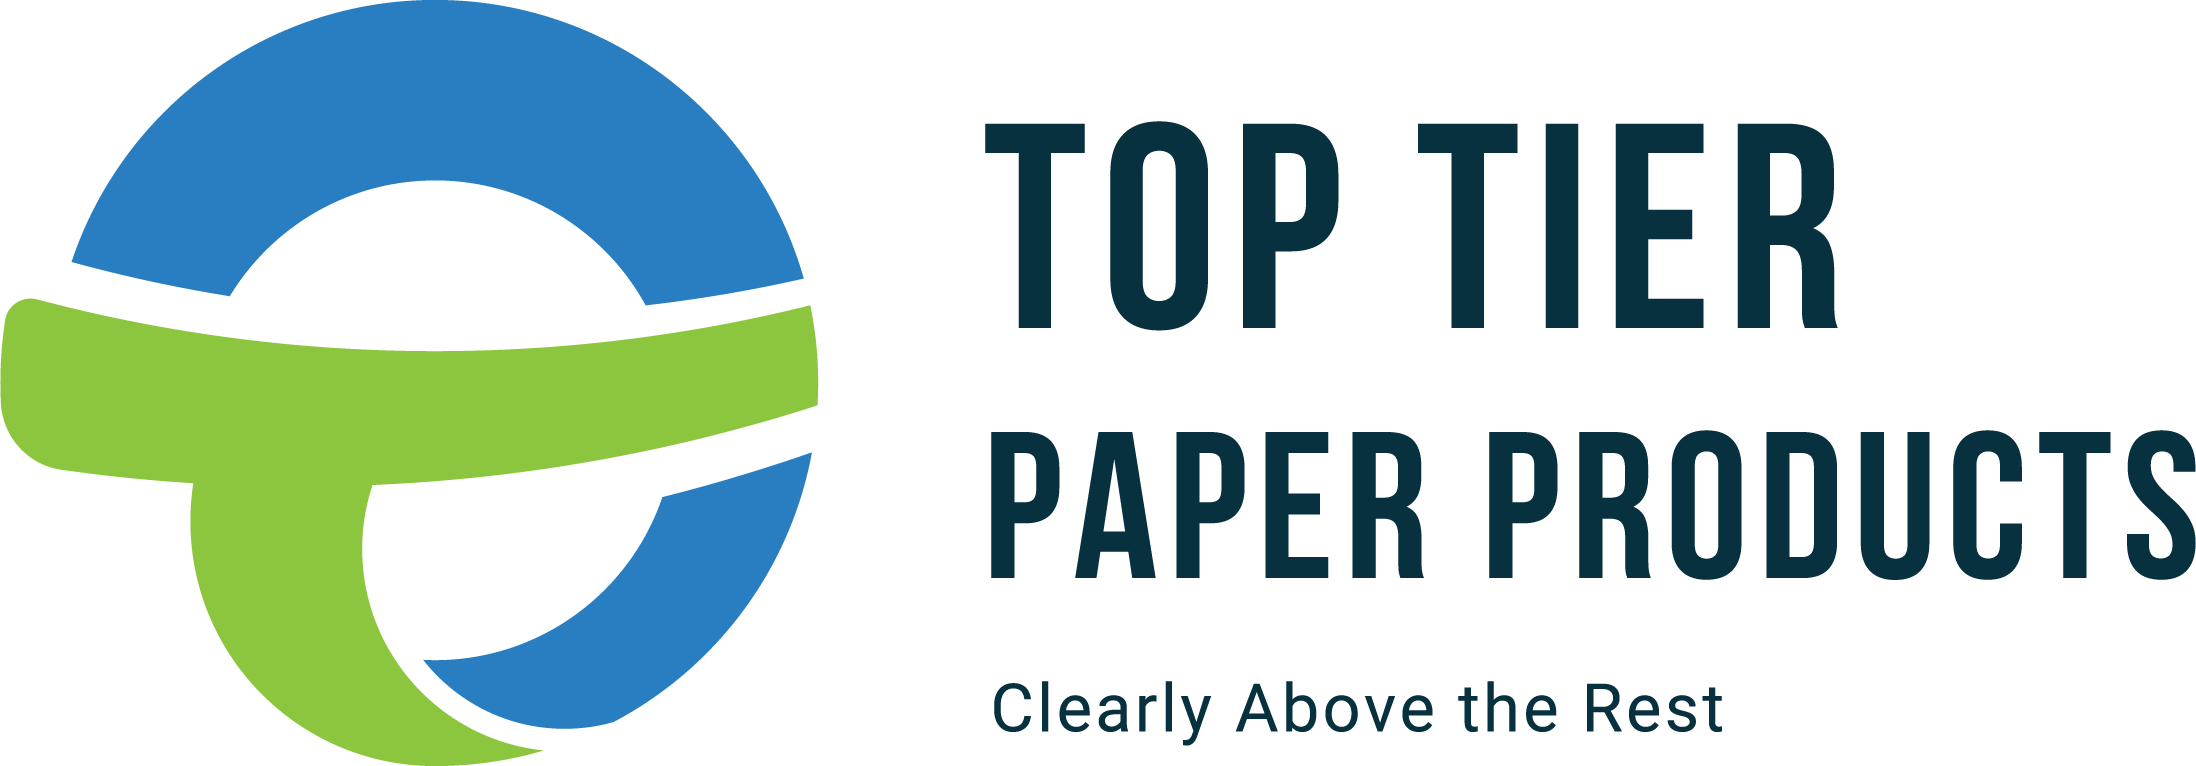 Top Tier Paper Products Inc